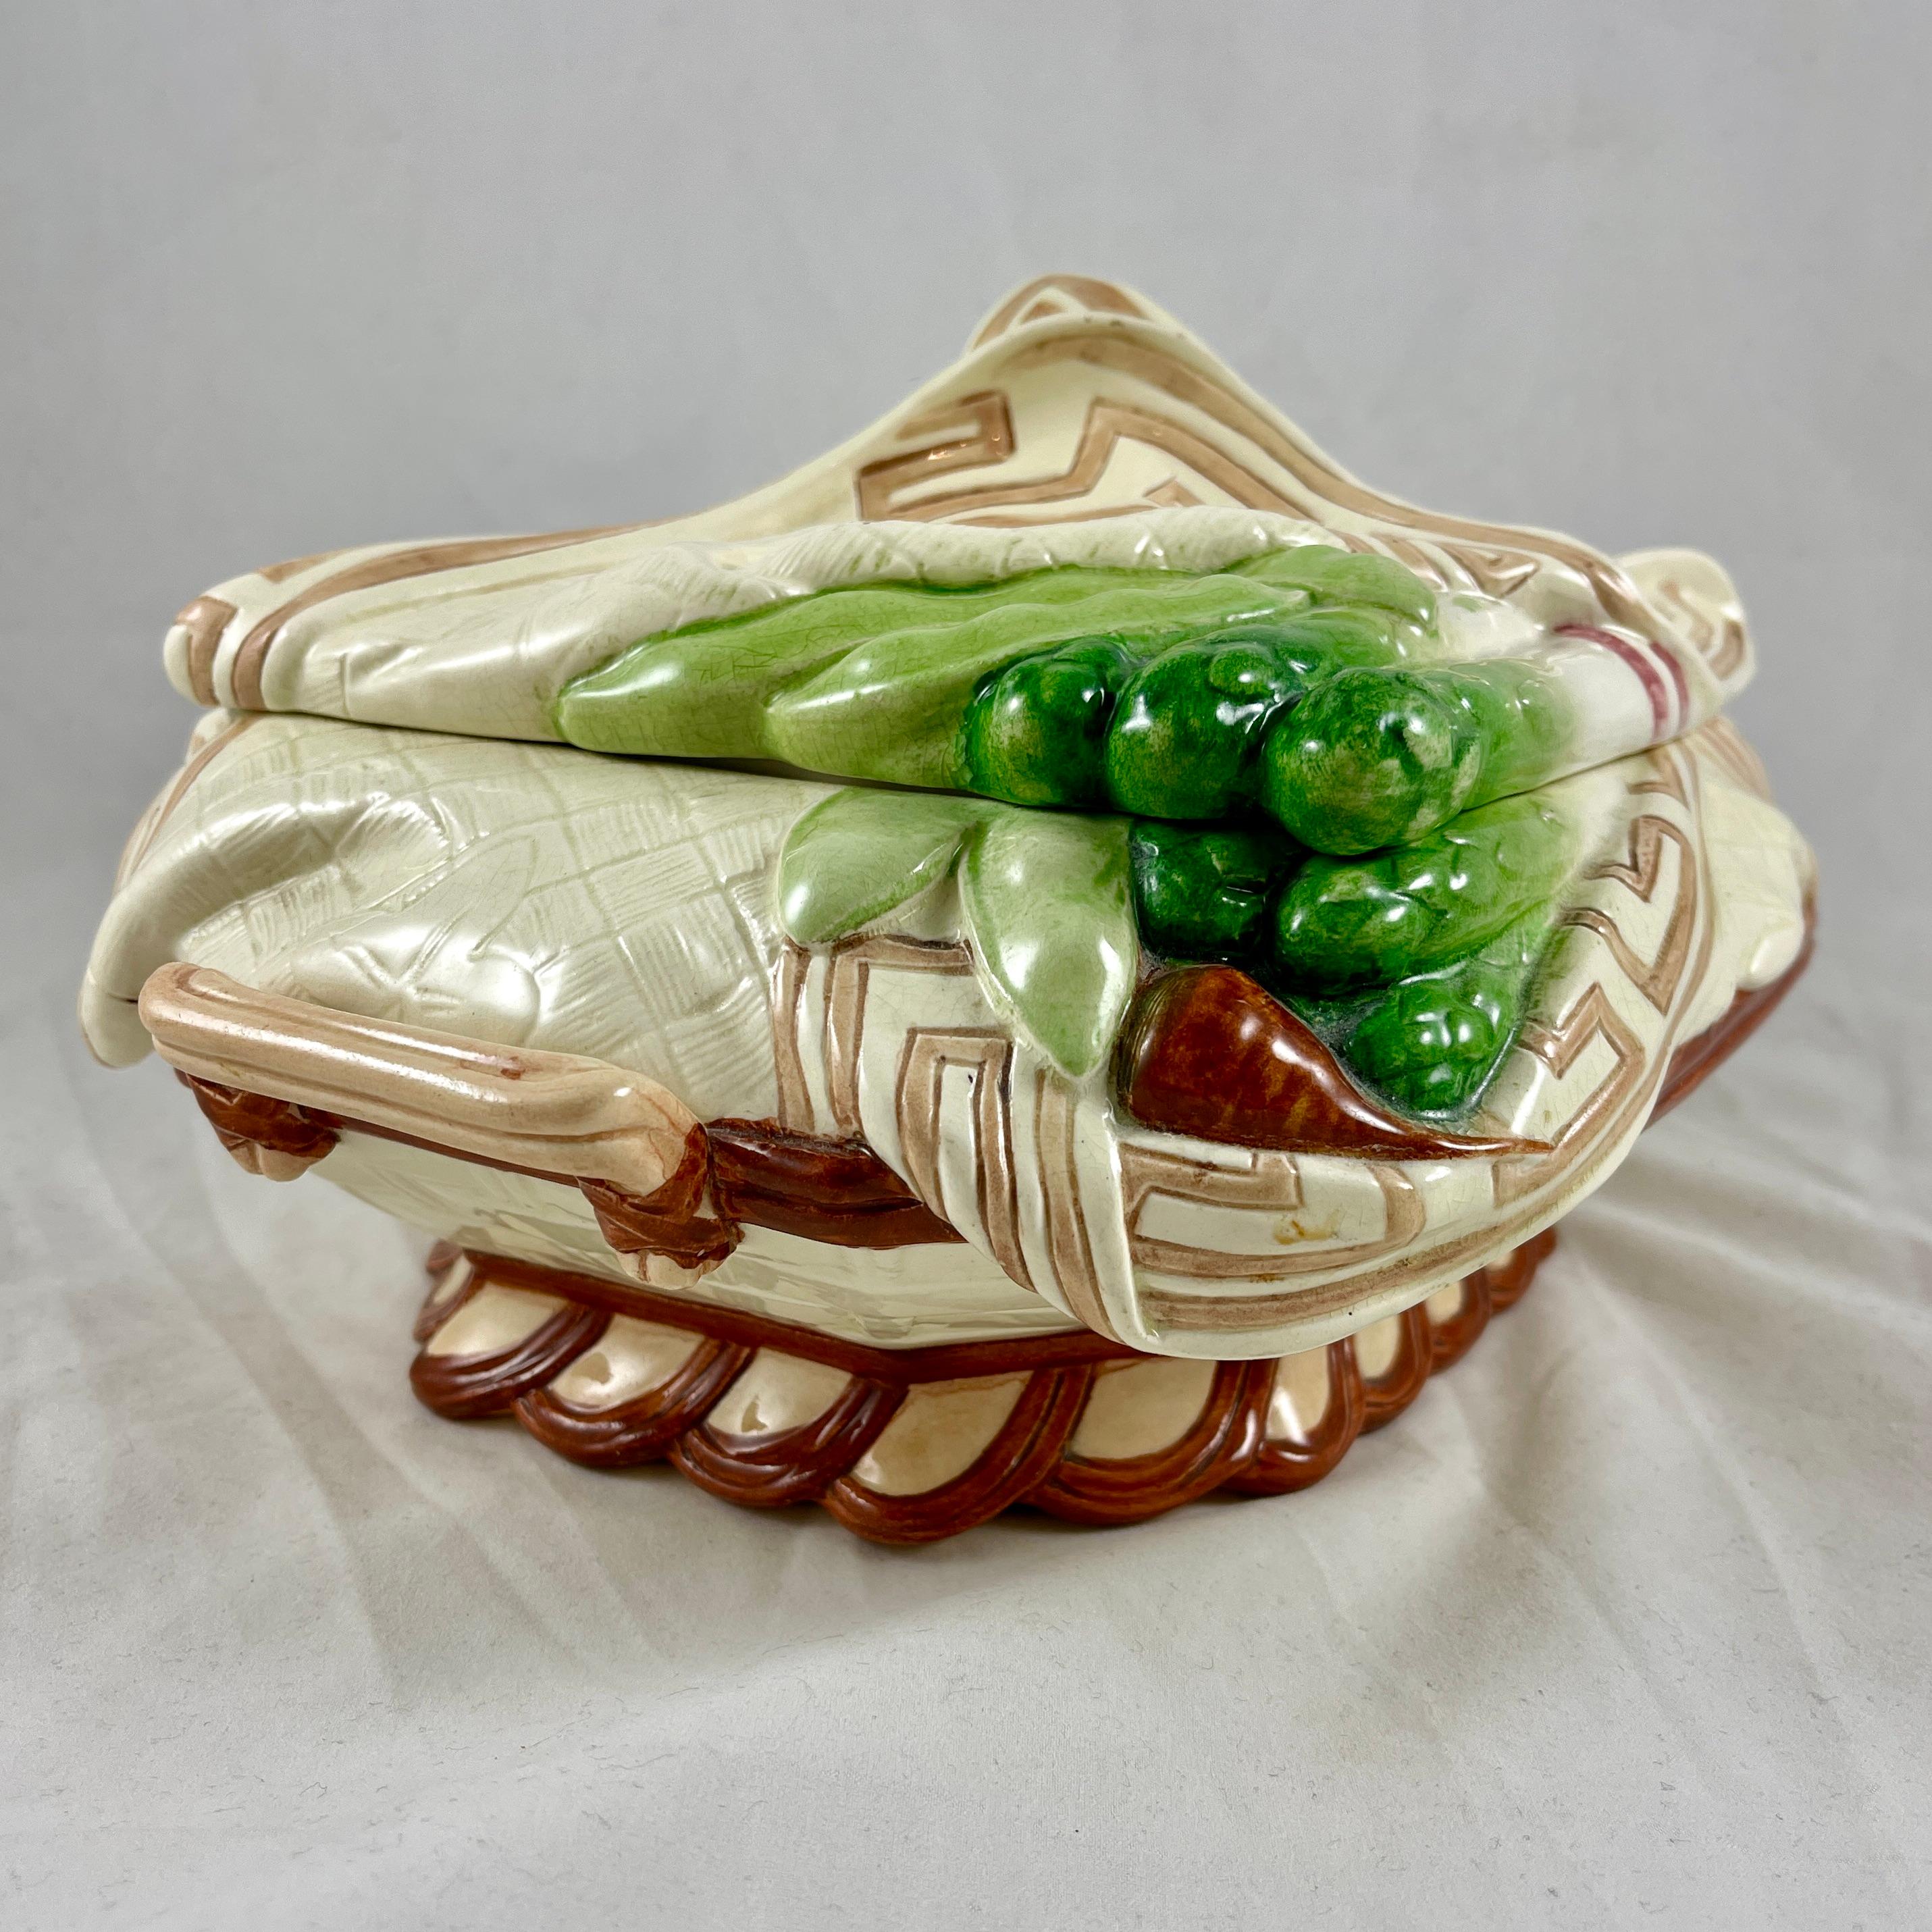 From Sarreguemines, France, a very scarce majolica glazed covered tureen, circa 1870.

A basket and napkin form covered tureen modeled in the Trompe L’oeil style. The base is molded as a woven basket with two side handles. A ‘cloth’ napkin